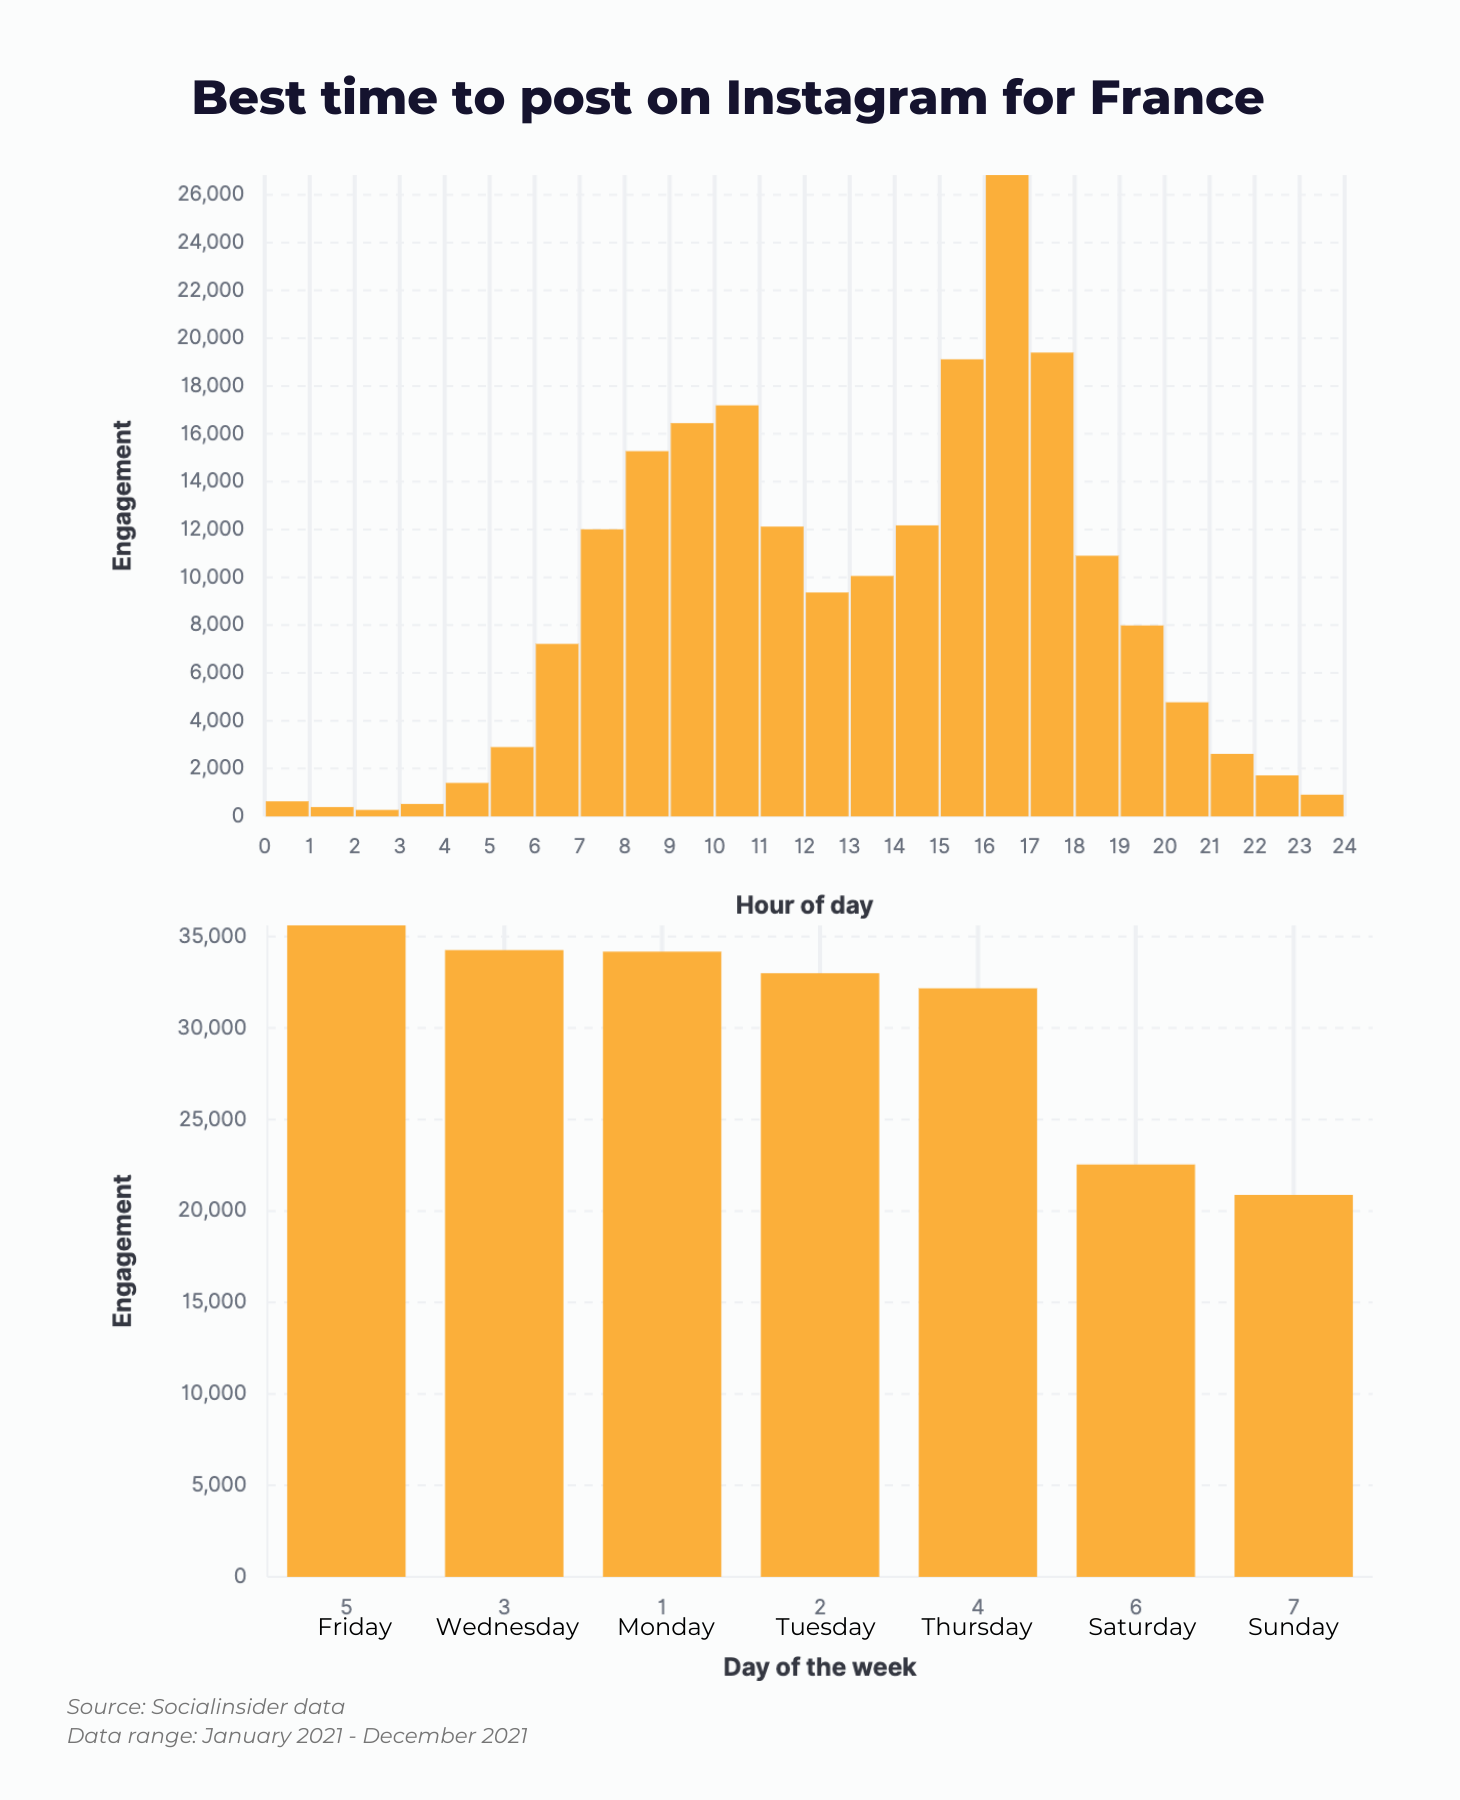 Here is a chart showing what data tells about the best time to post on Instagram for France.